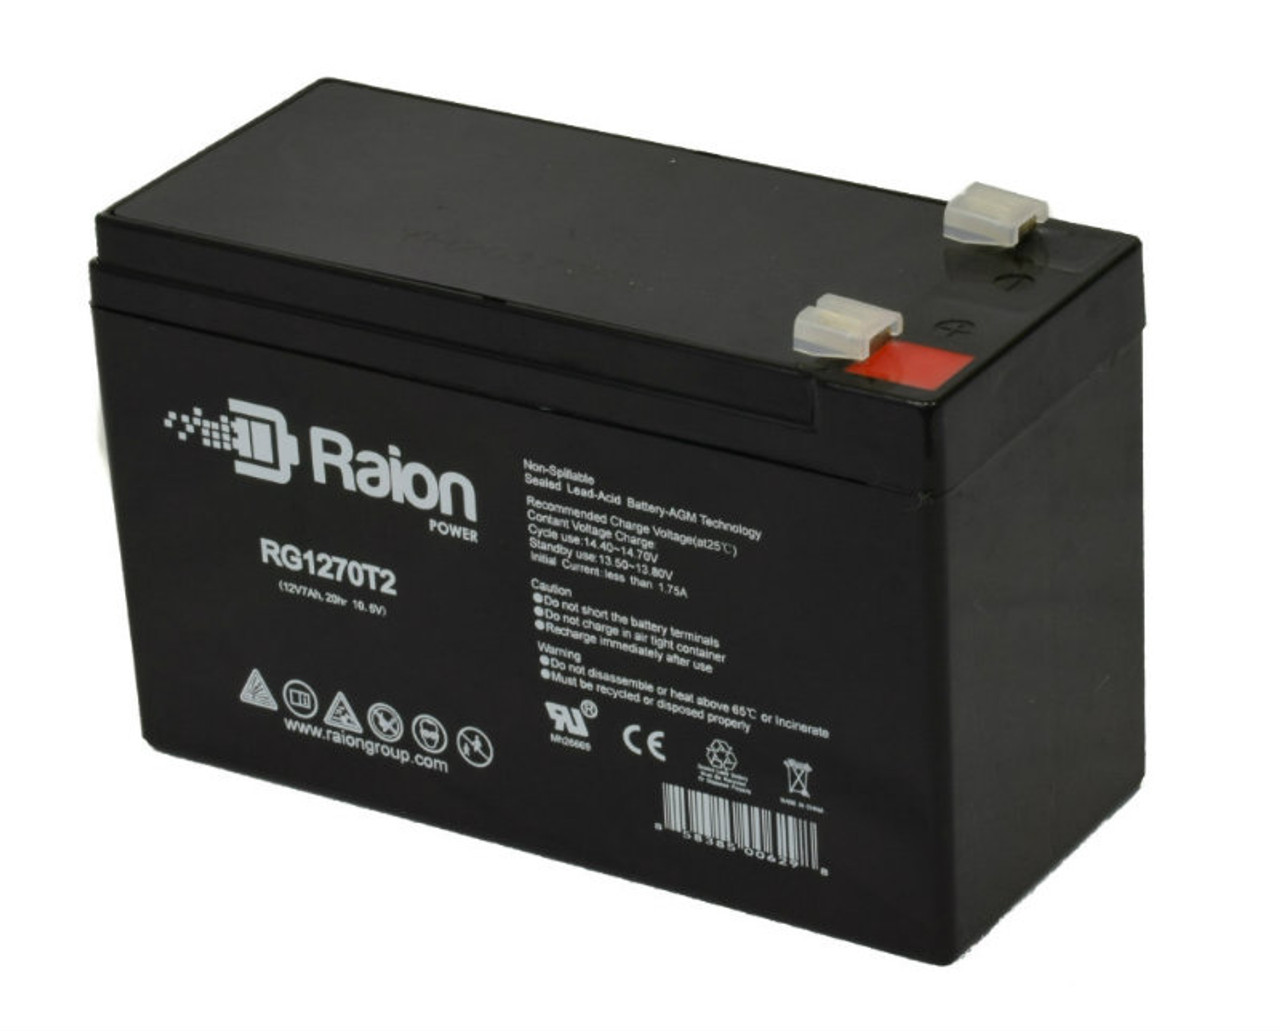 Raion Power RG1270T1 12V 7Ah Non-Spillable Replacement Battery for Consent Battery GS126-5